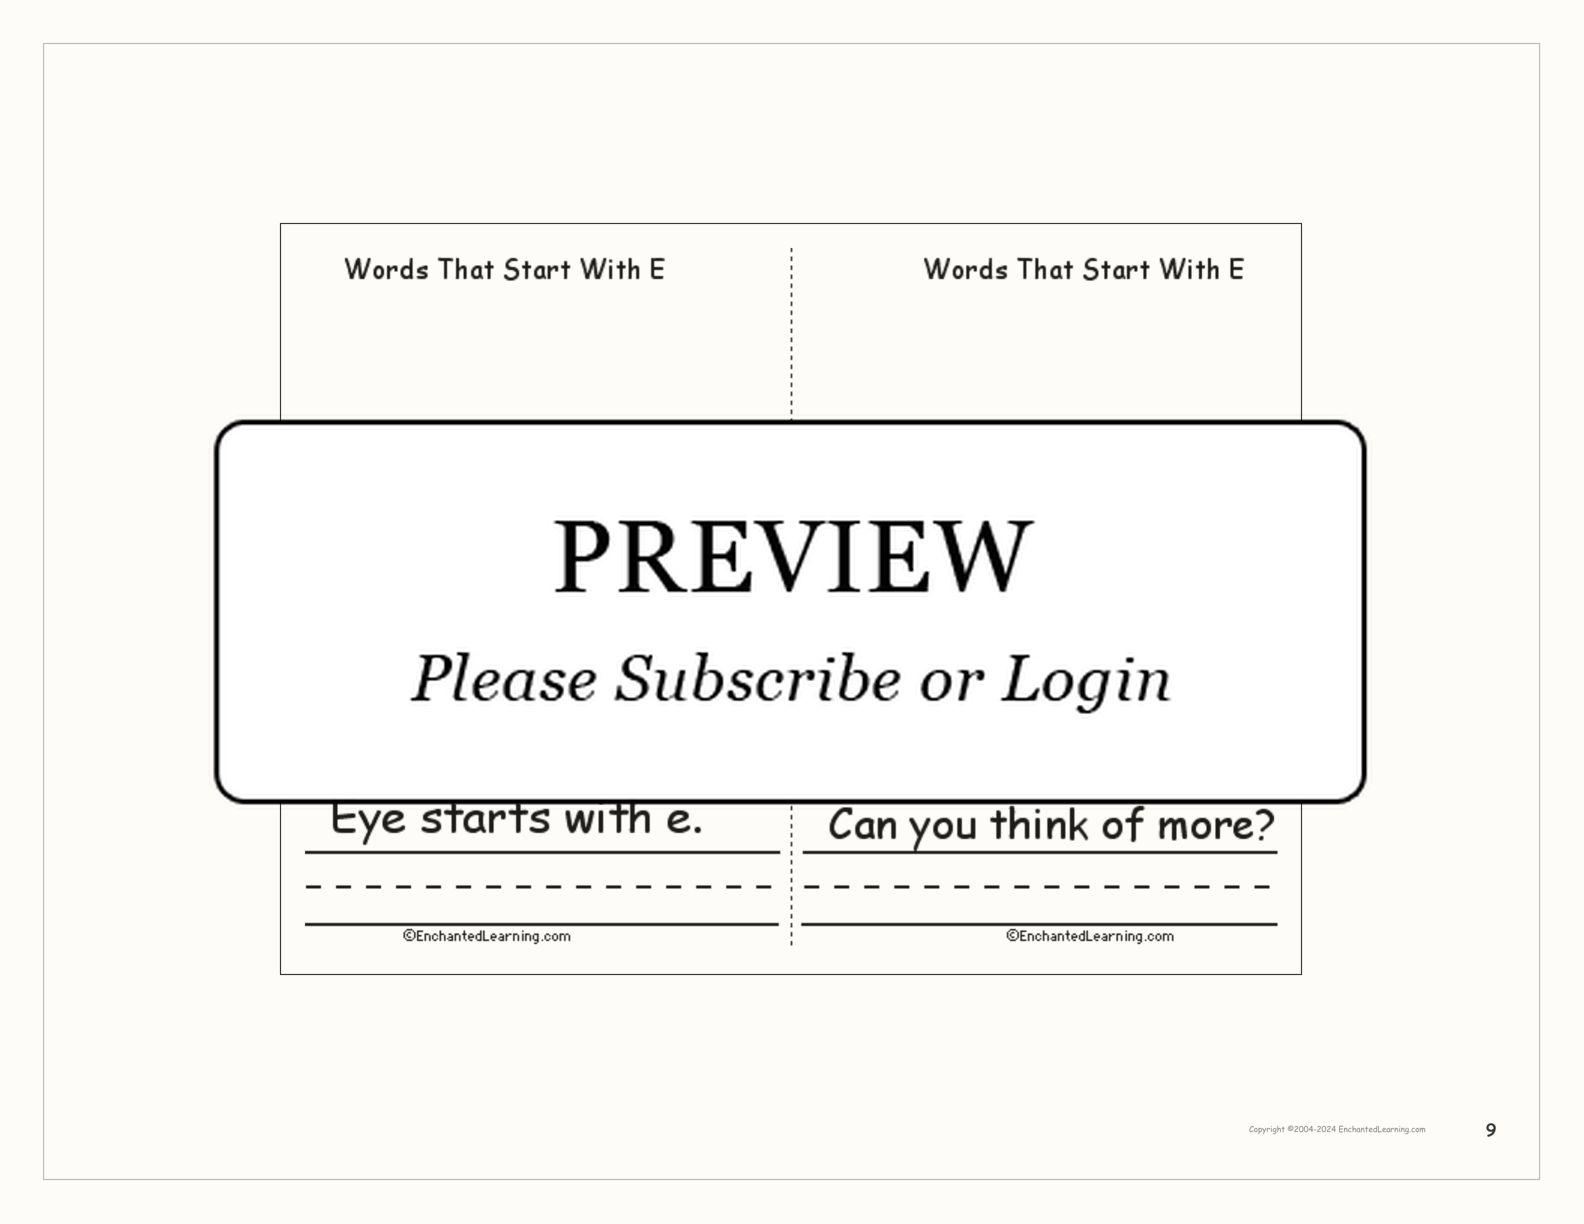 Words That Start With E interactive worksheet page 9